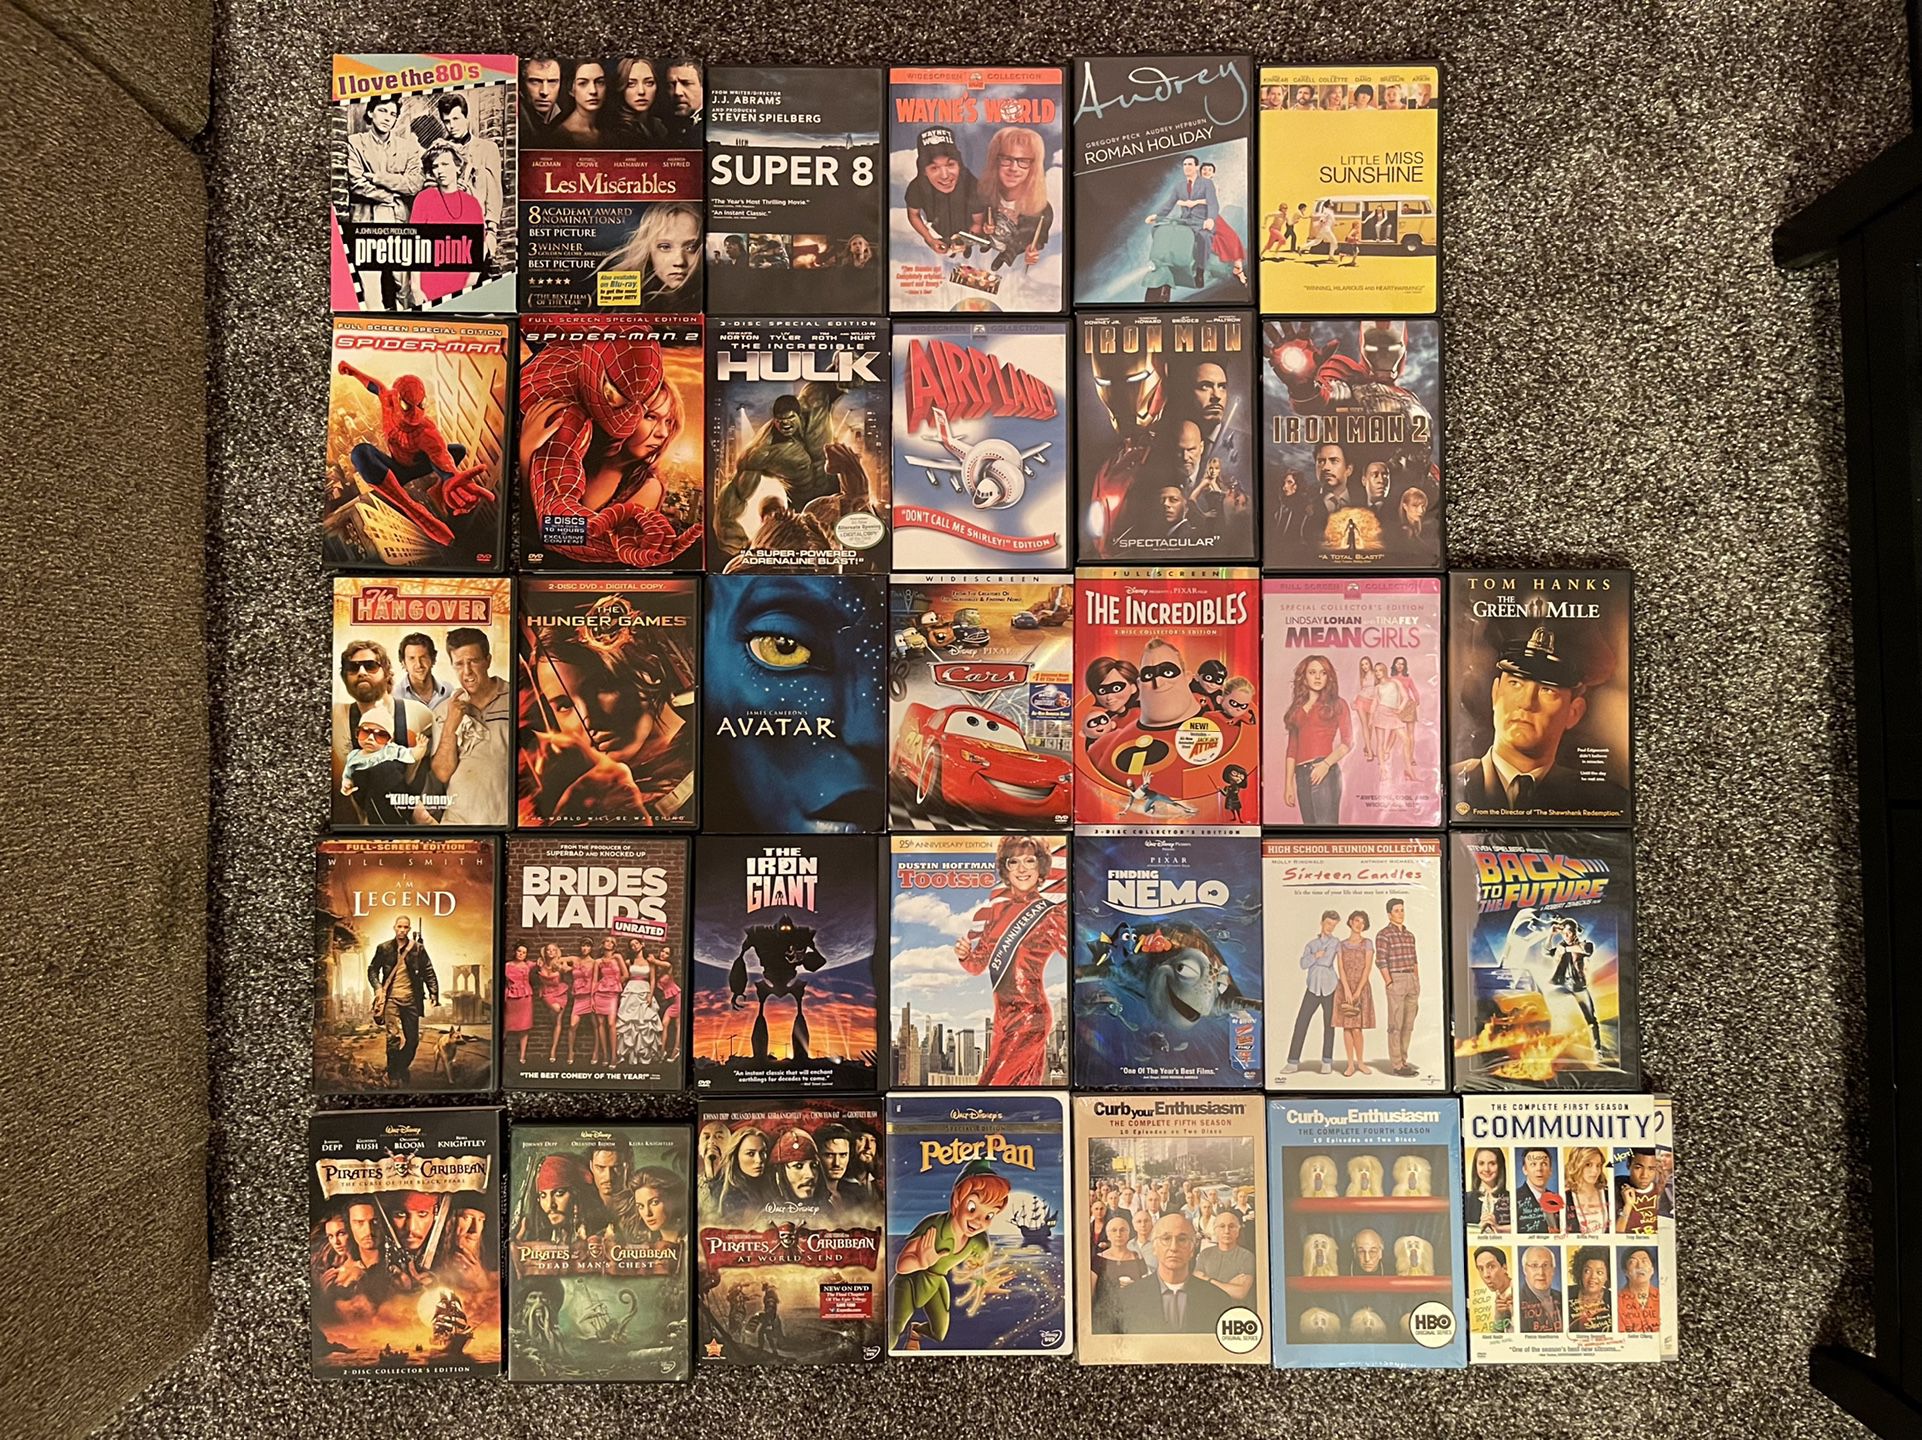 Collection/Lot Of 33 DVD Items, Including Movies and Seasons of TV Series